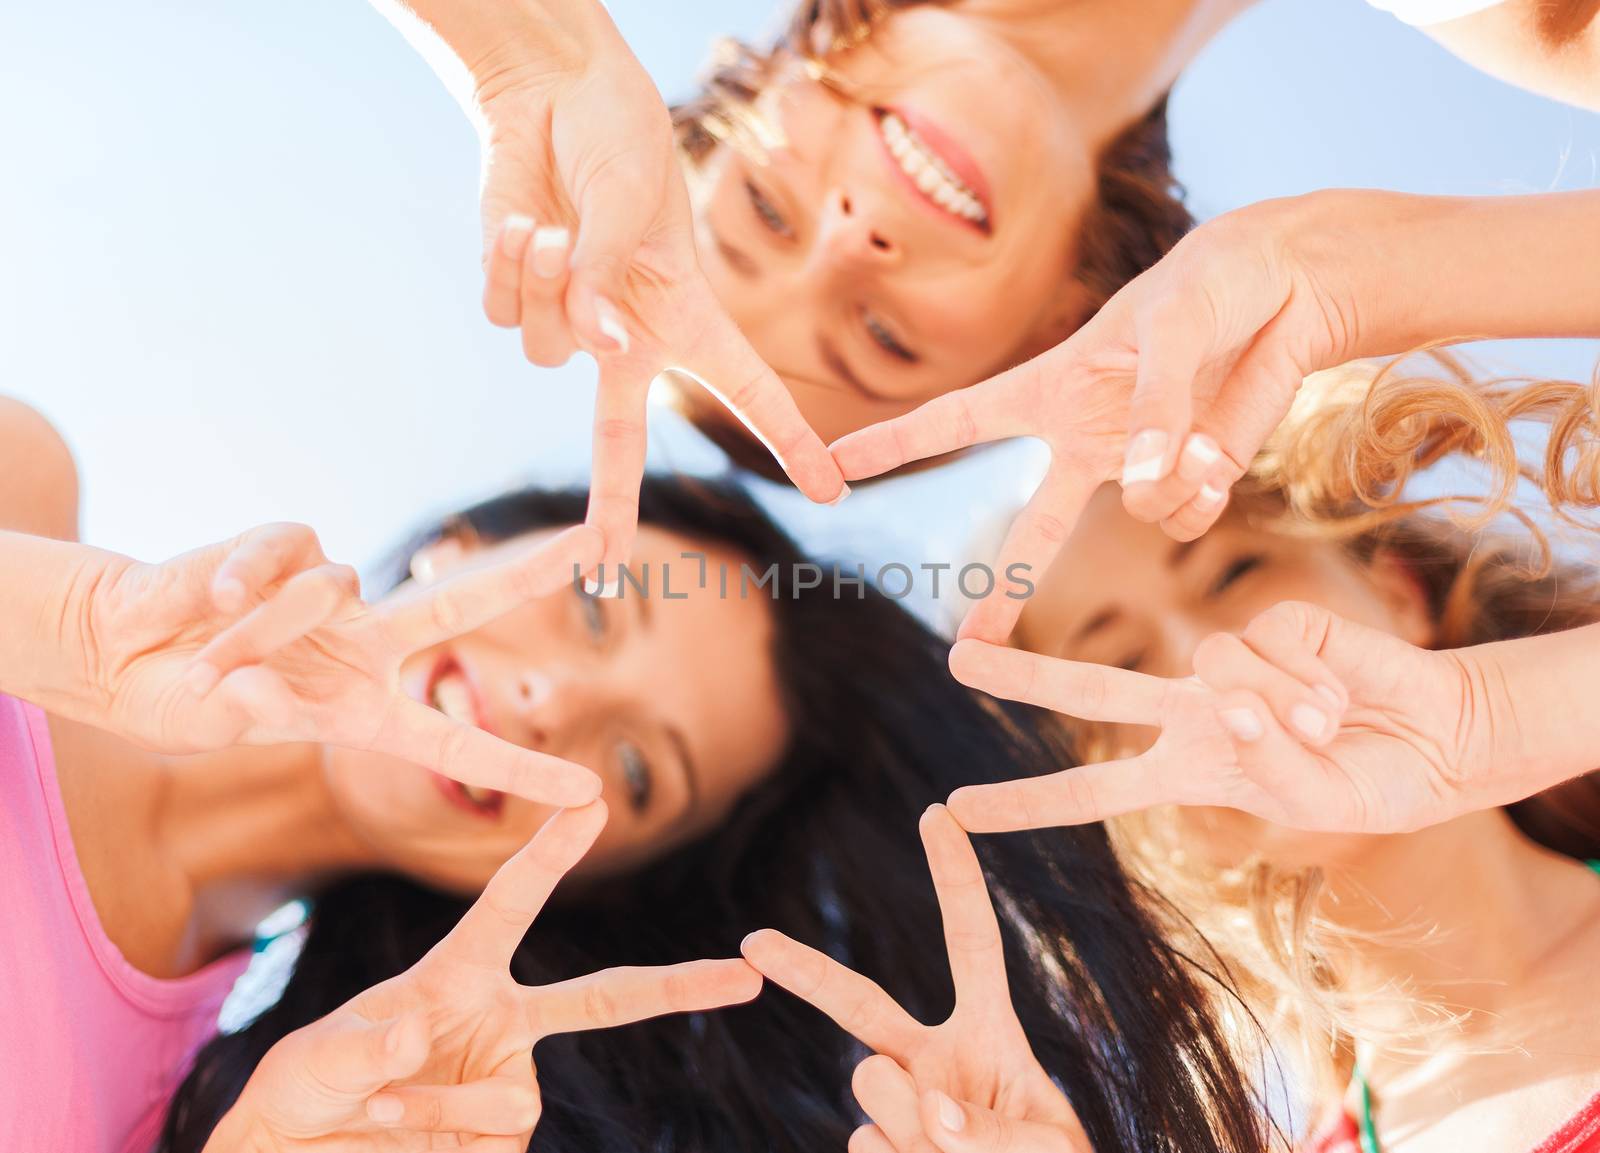 girls looking down and showing finger five gesture by dolgachov